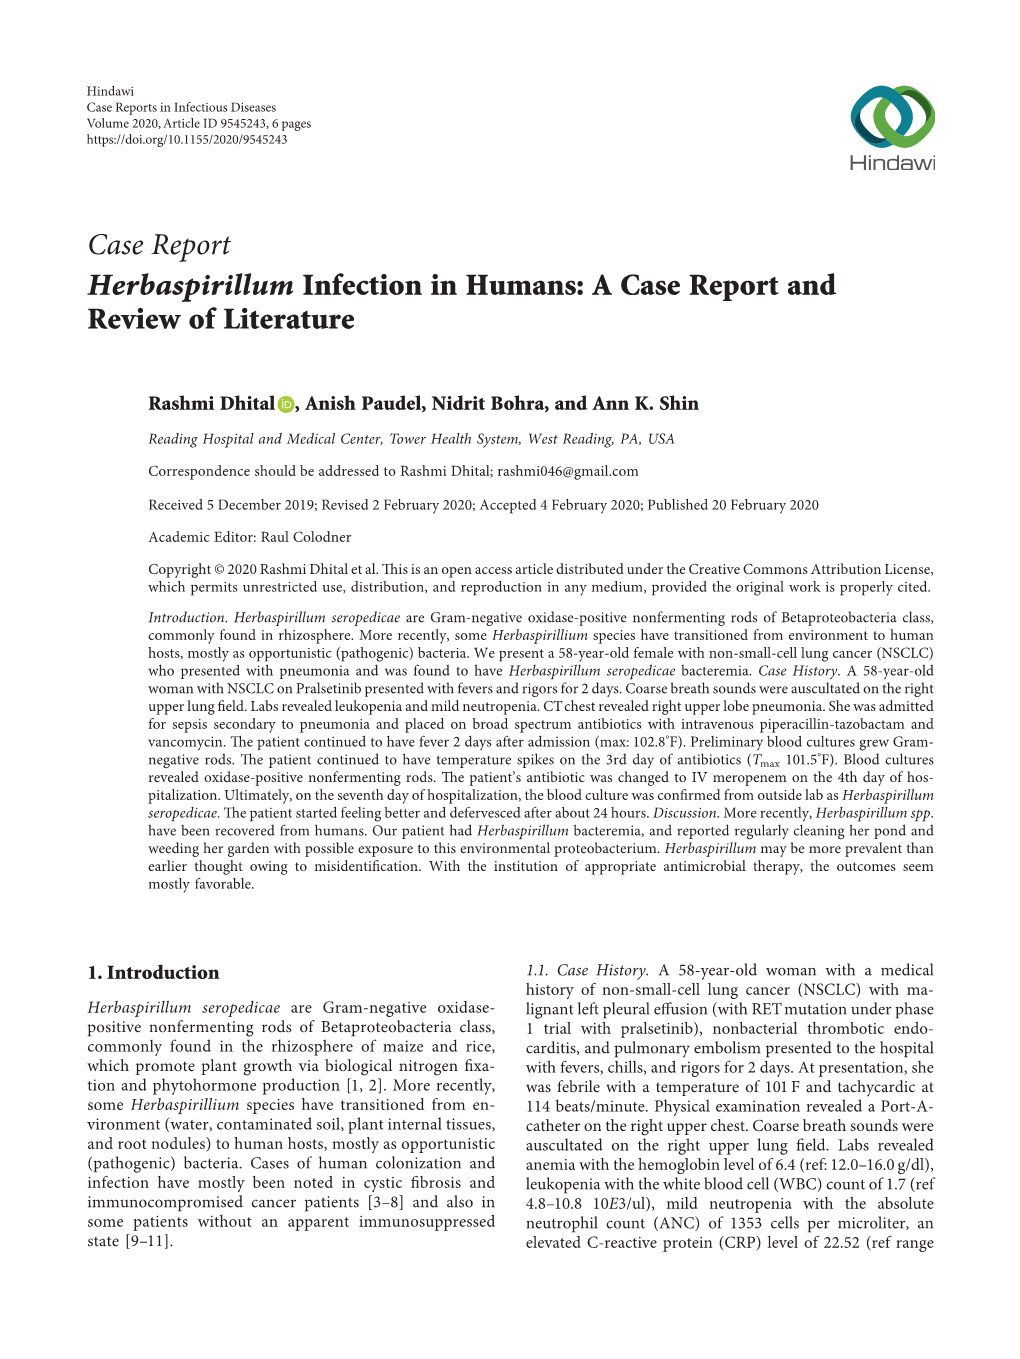 Case Report Herbaspirillum Infection in Humans: a Case Report and Review of Literature